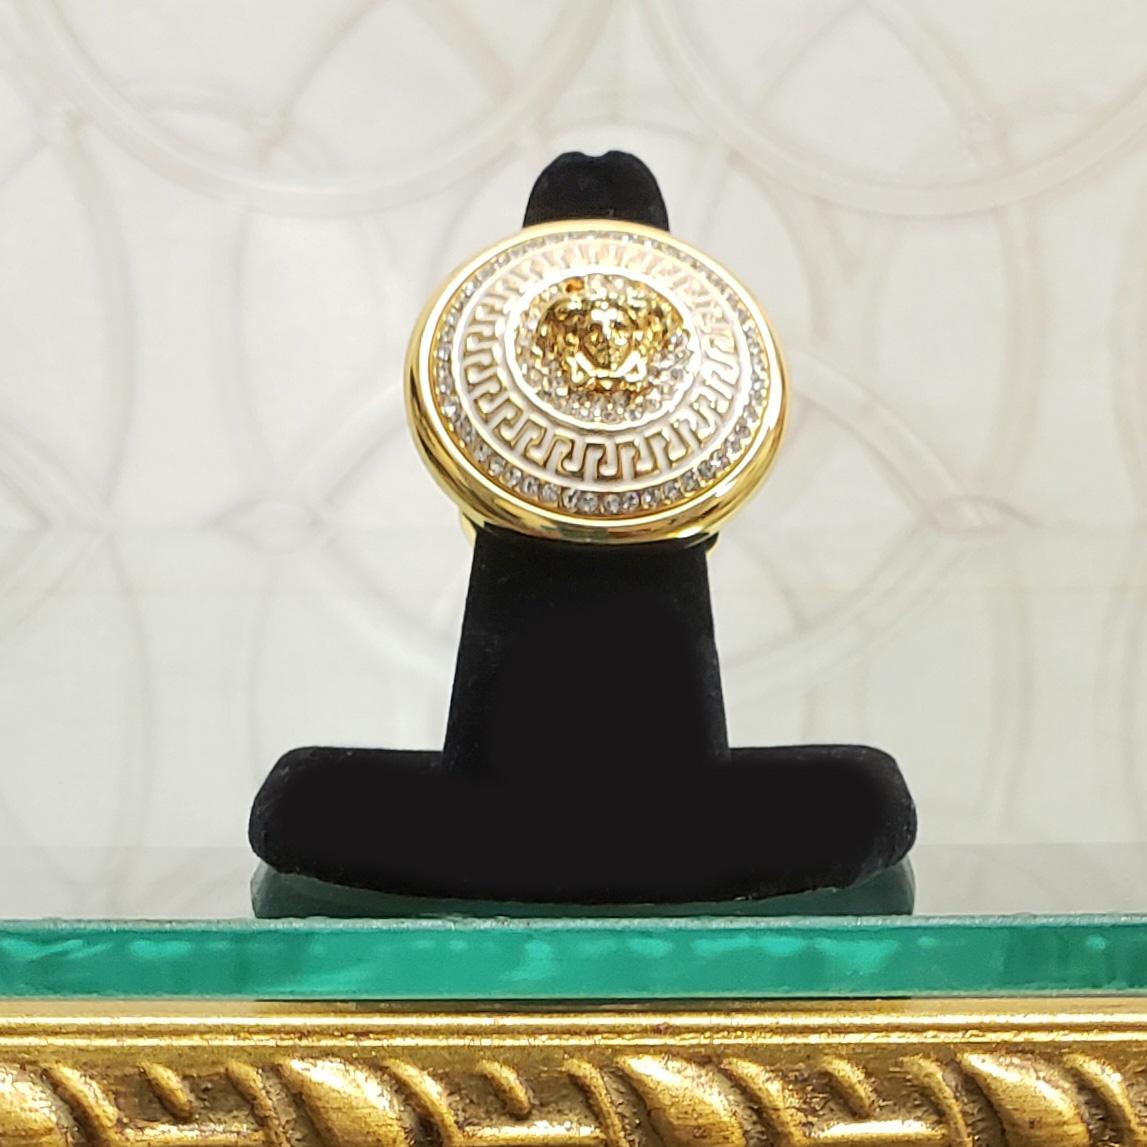 VERSACE



NEW GIANNI VERSACE  CRYSTAL GOLD MEDUSA VANITAS DISC RING w/WHITE ENAMEL
24k Gold plated Metal

Experience the height of dramatic elegance. Crystal adorned beauty creates a stunning showstopper. 

Indulge in luxurious glamour with